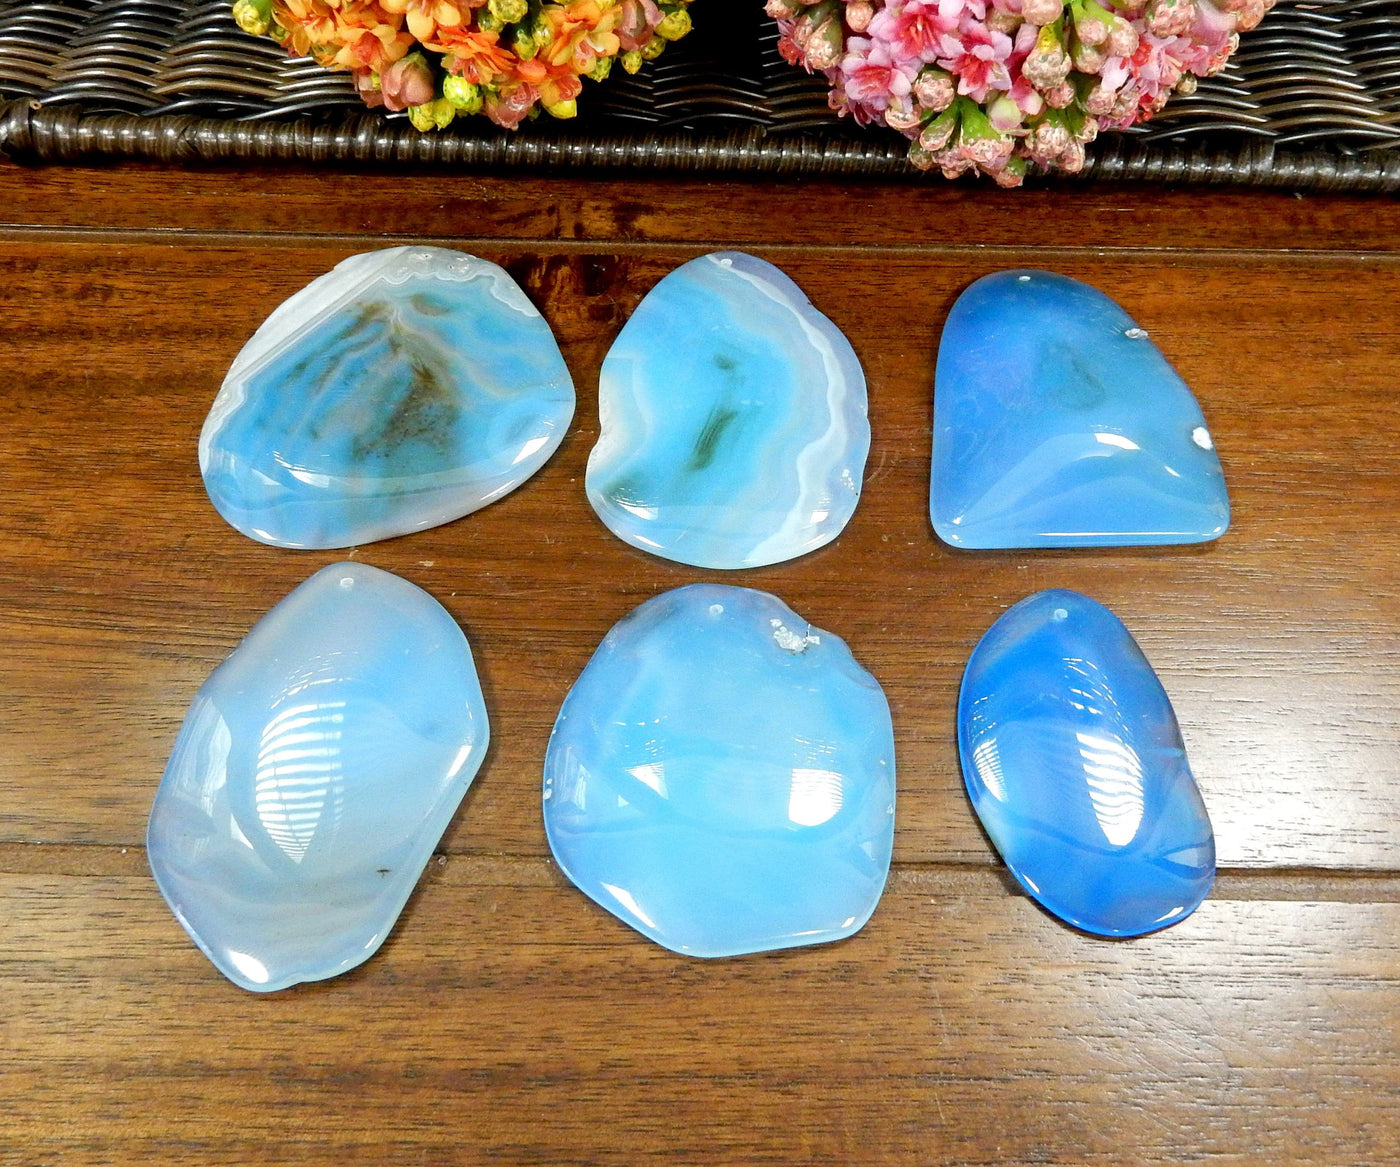 6 Light Blue FreeForm Agate Slices with Polished Edge on Wooden Background.